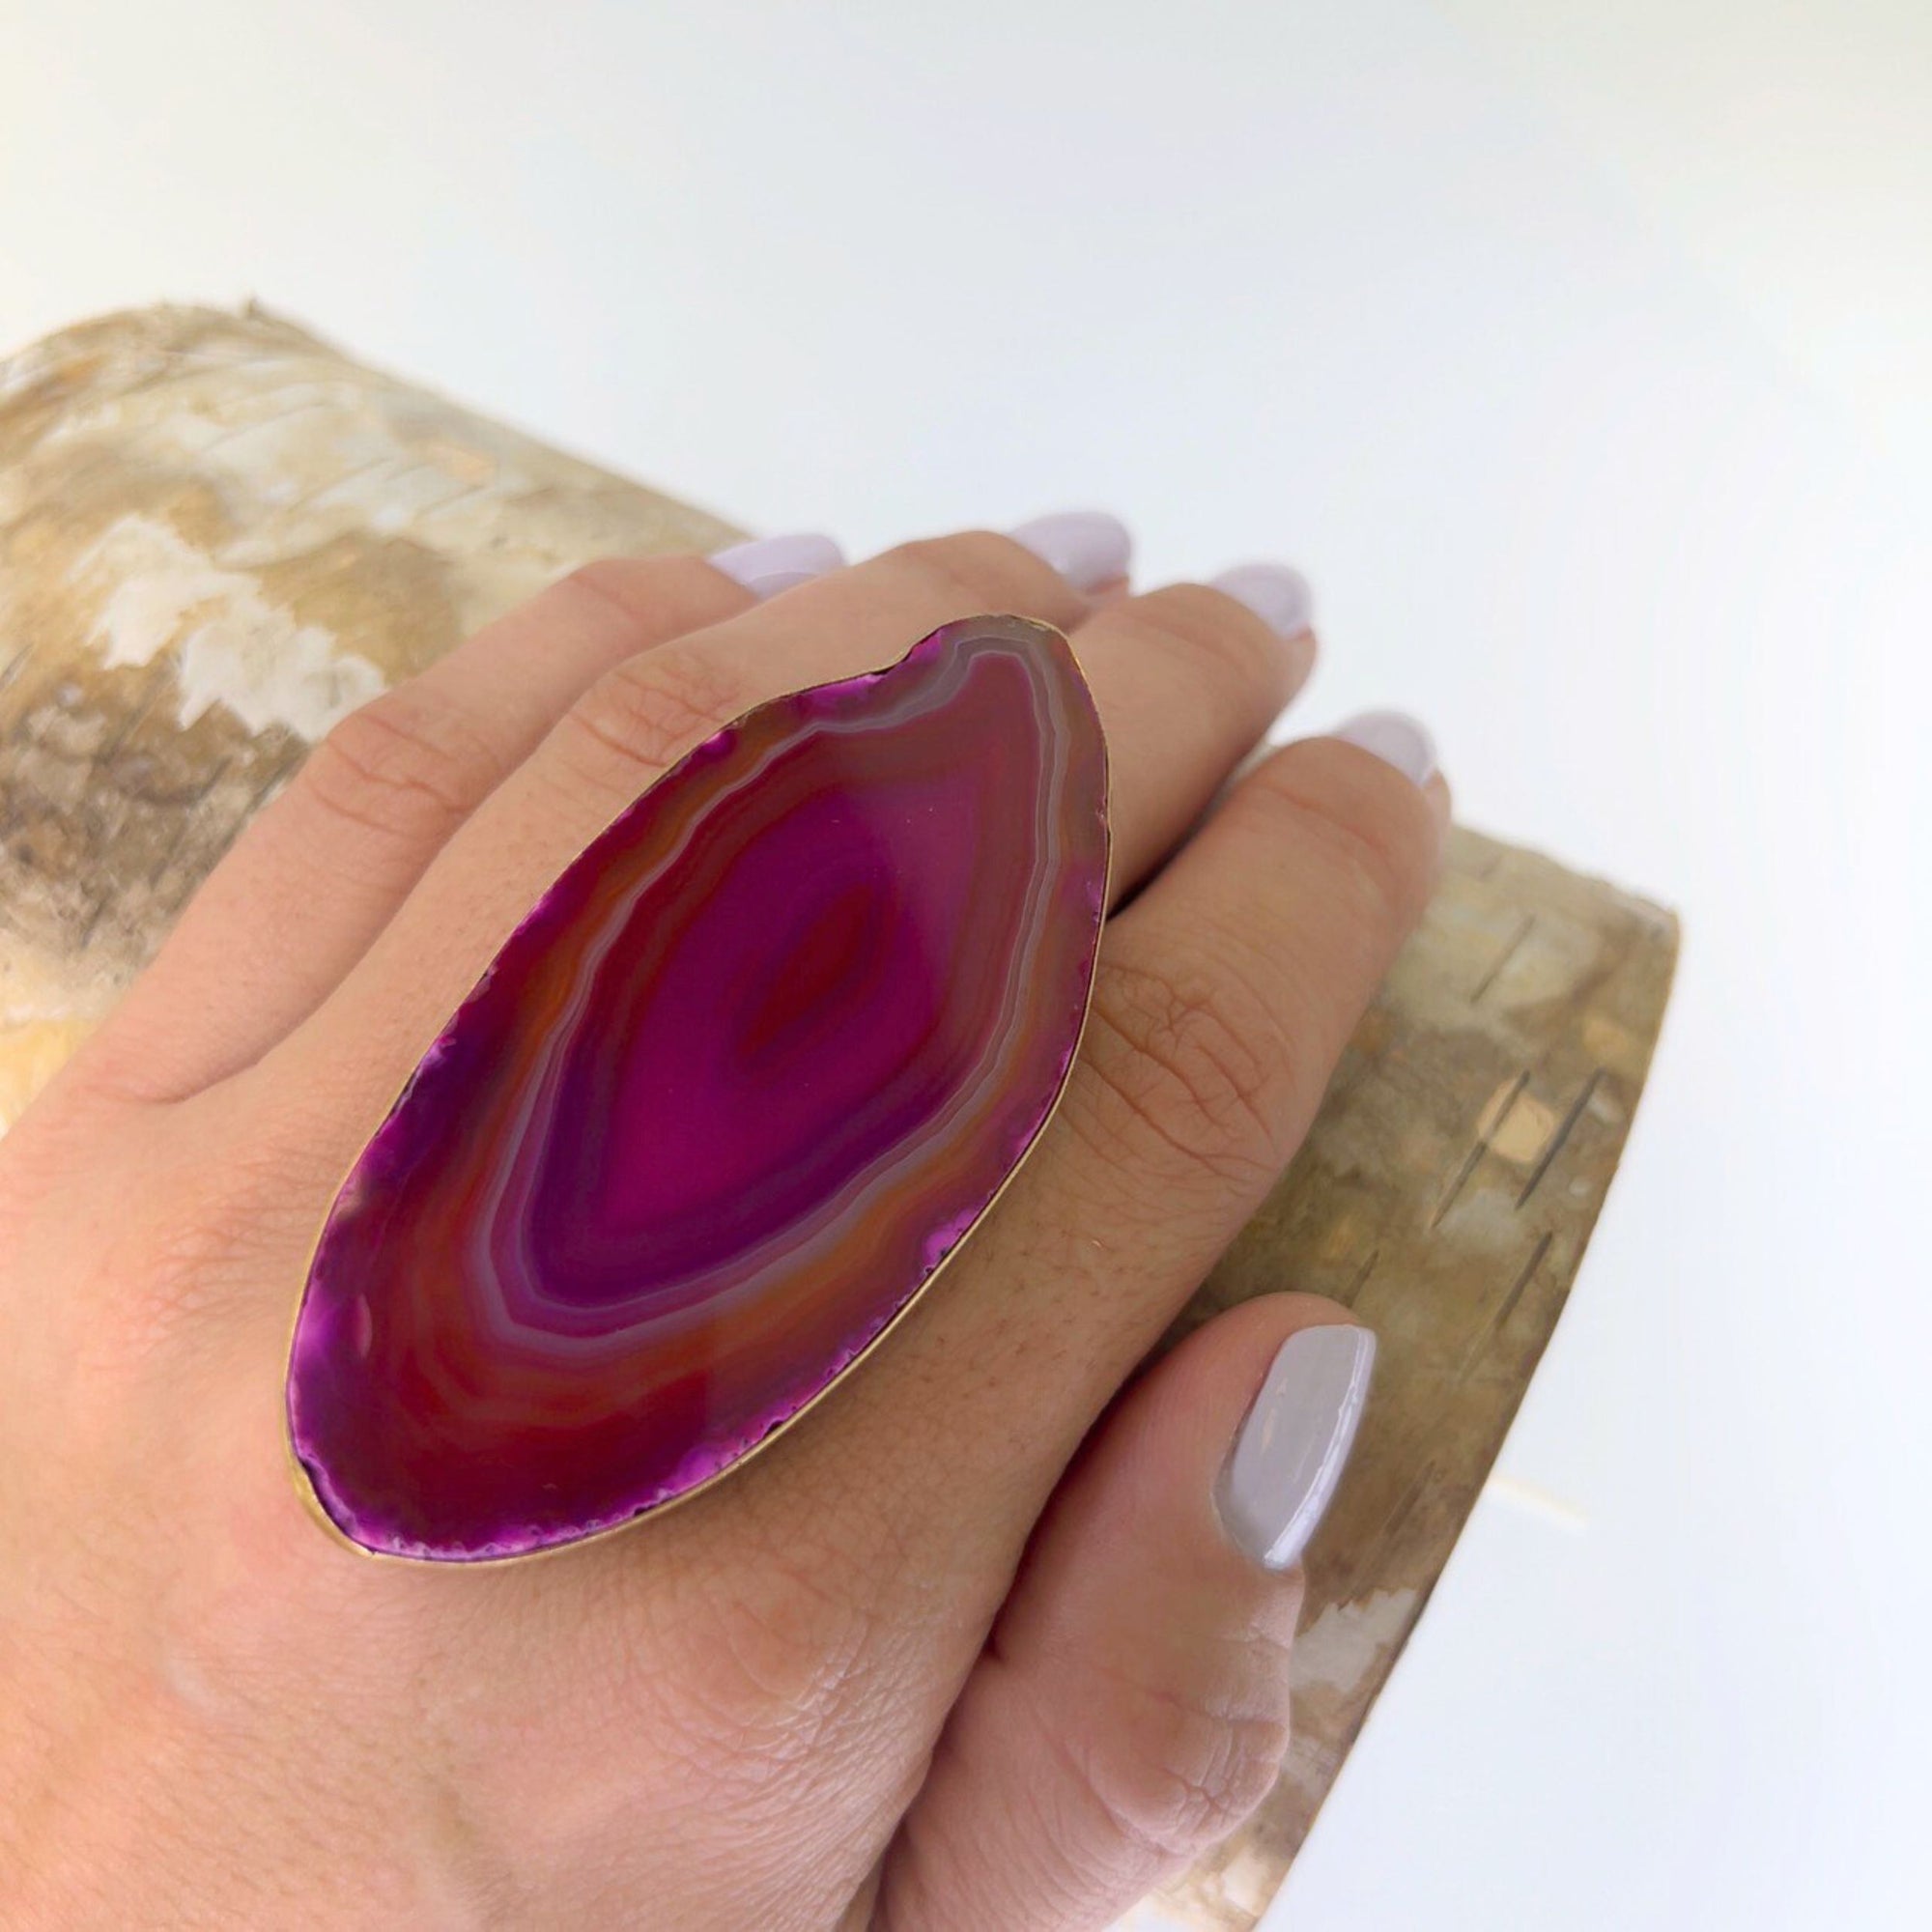 Alchemia Pink Agate Slice Adjustable Ring - Style #20 | Charles Albert Jewelry